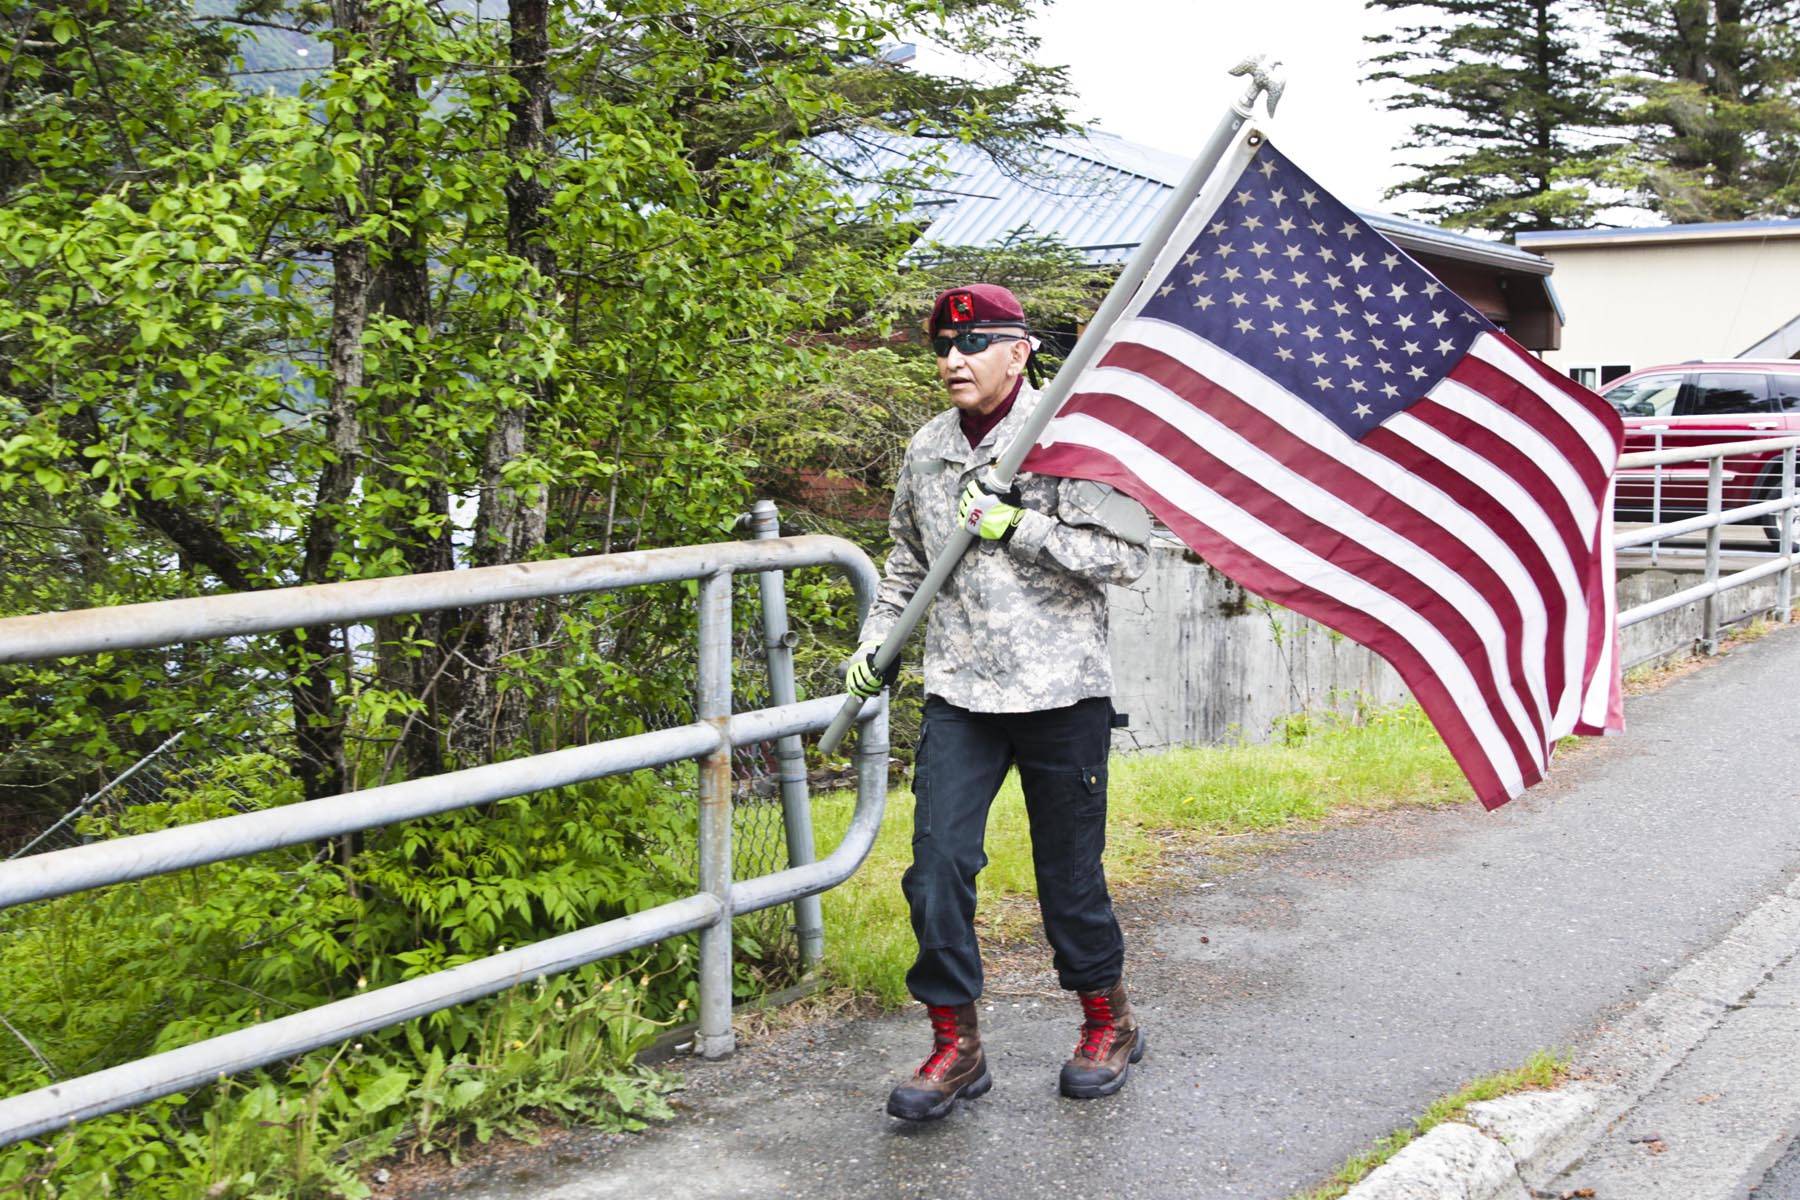 Henry Williams runs from Douglas to the Mendenhall Valley on Memorial Day to honor dead service members, including his relative, Air Force Tech Sgt. Leslie Dominic Williams, who died in Afghanistan in 2011. (Michael S. Lockett | Juneau Empire)